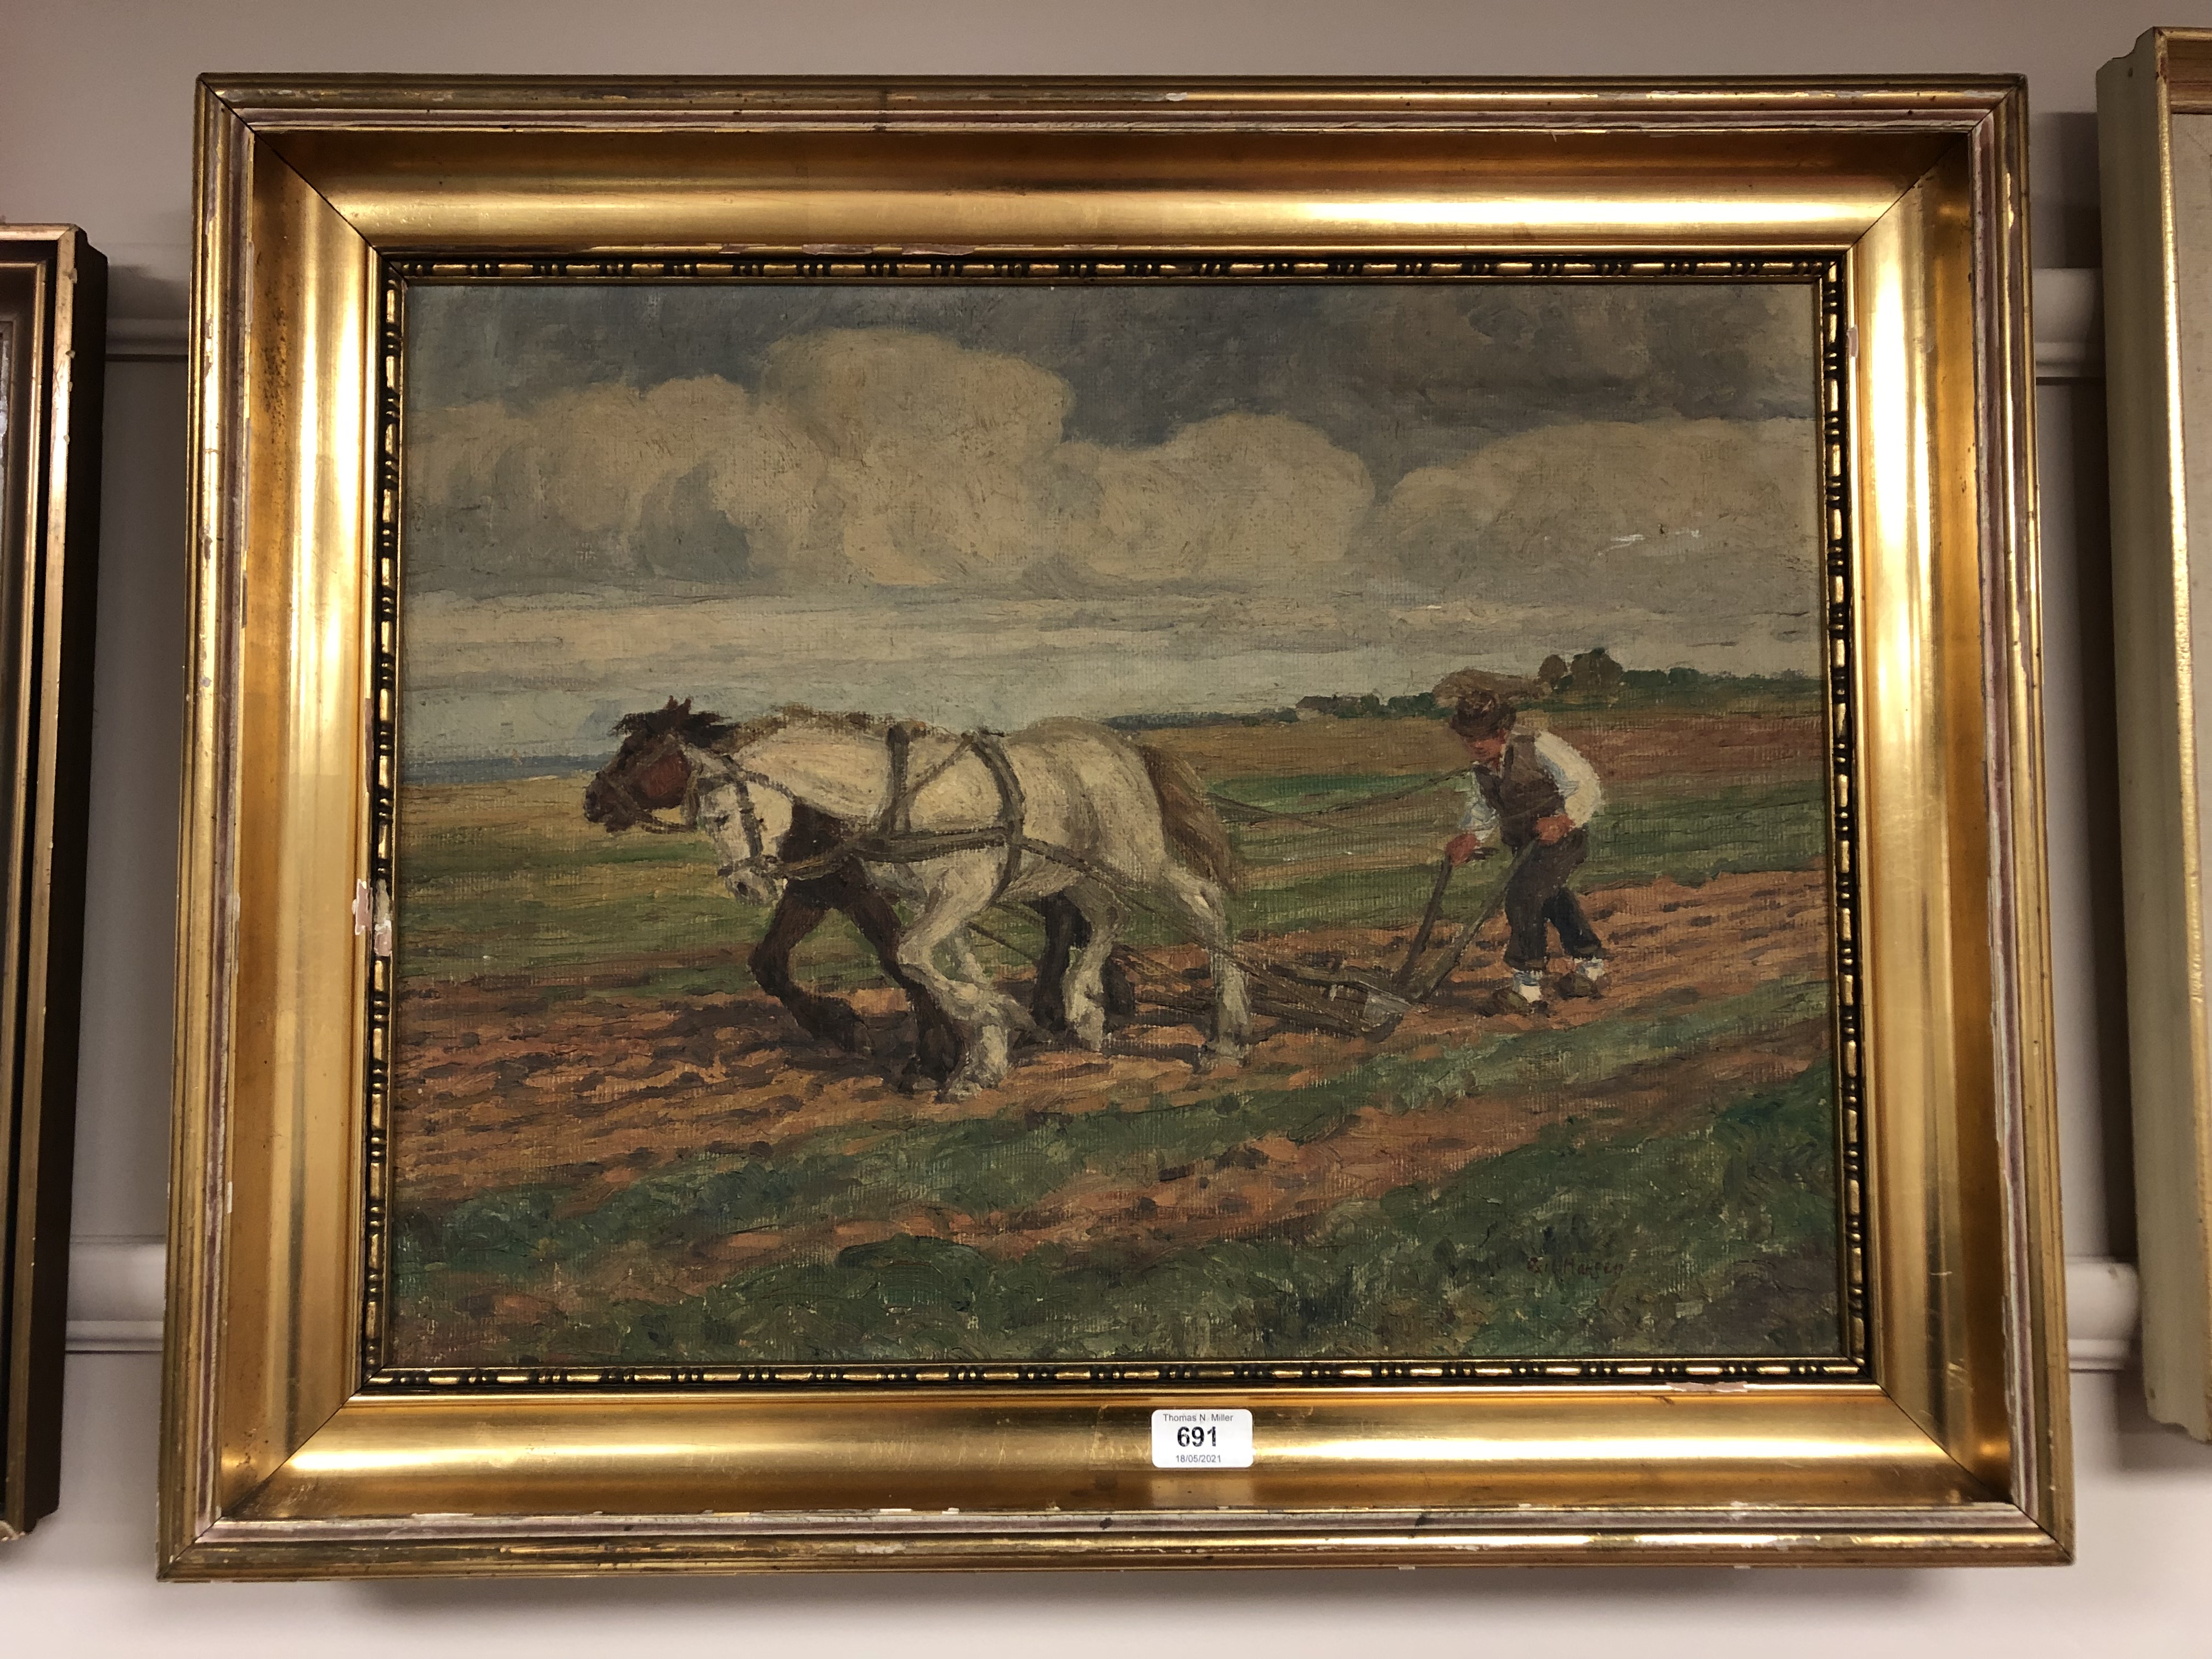 Continental School : Horses ploughing a field, oil on canvas, 55 cm x 42 cm, signed Hansen, framed.